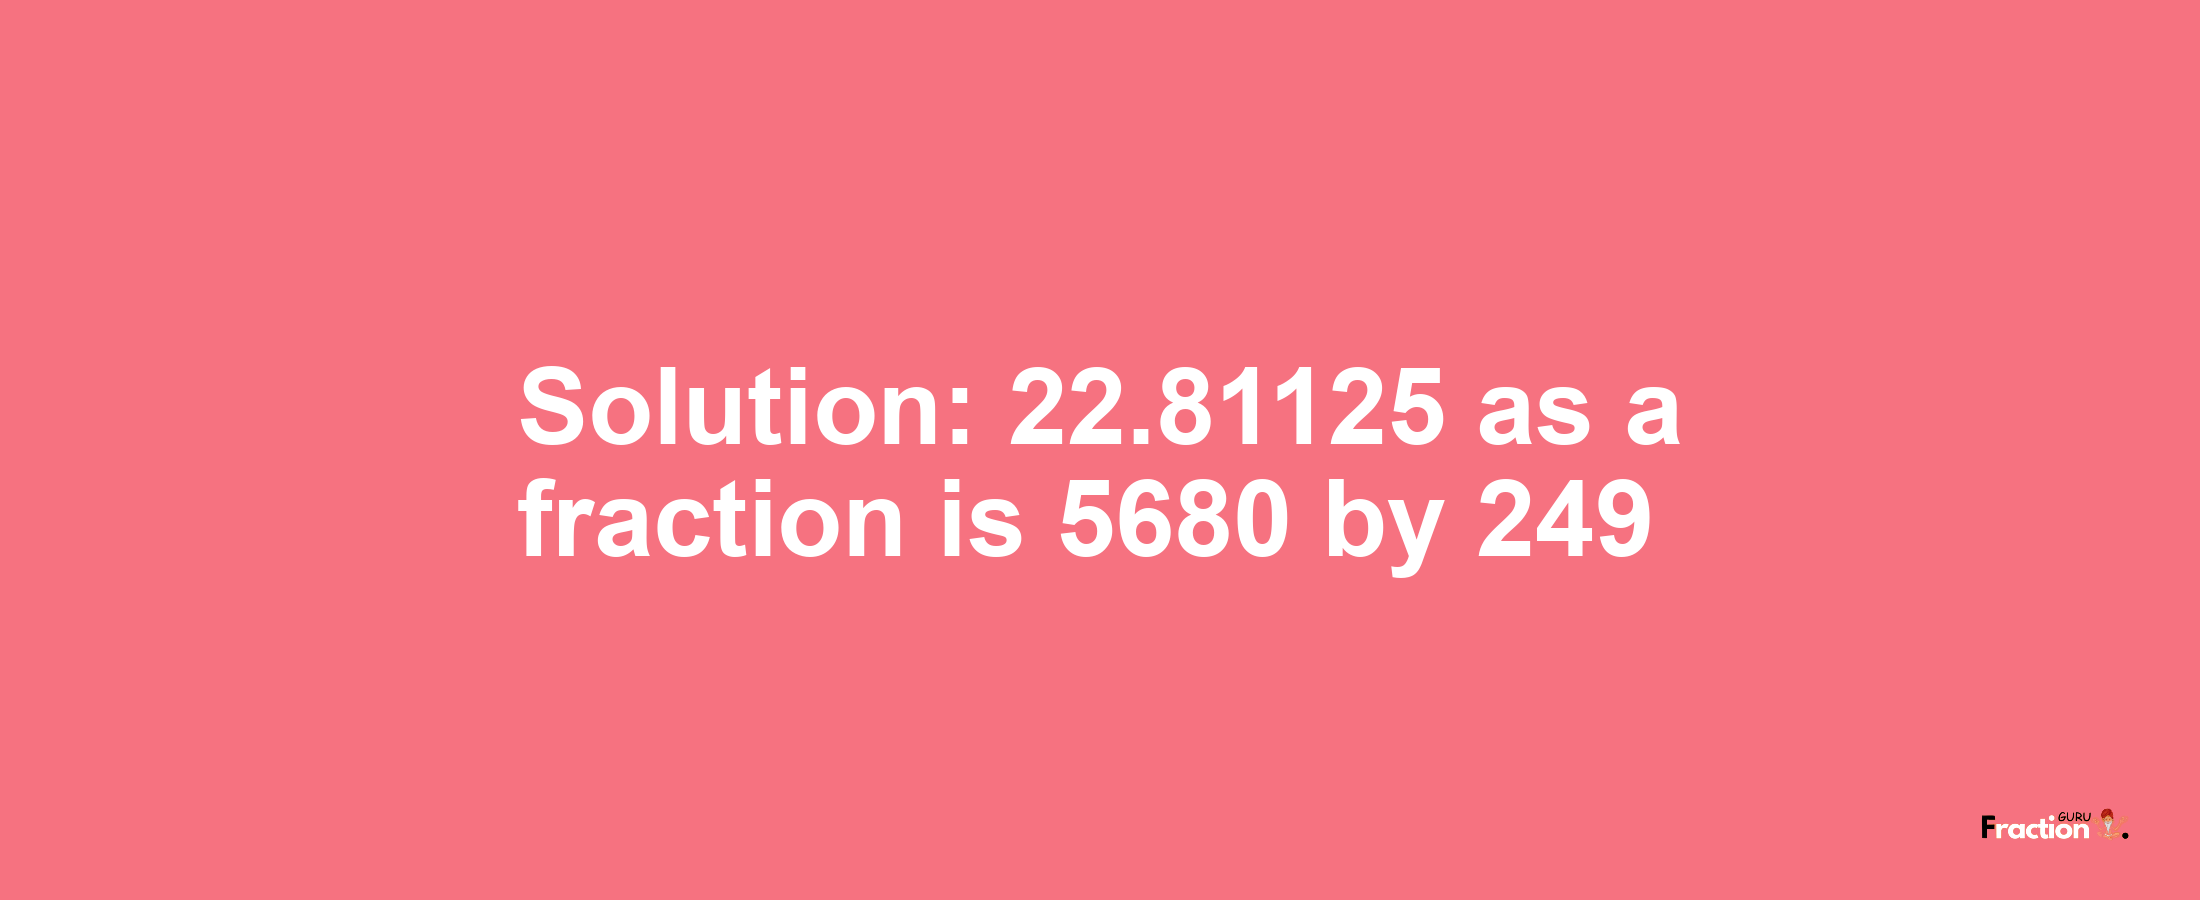 Solution:22.81125 as a fraction is 5680/249